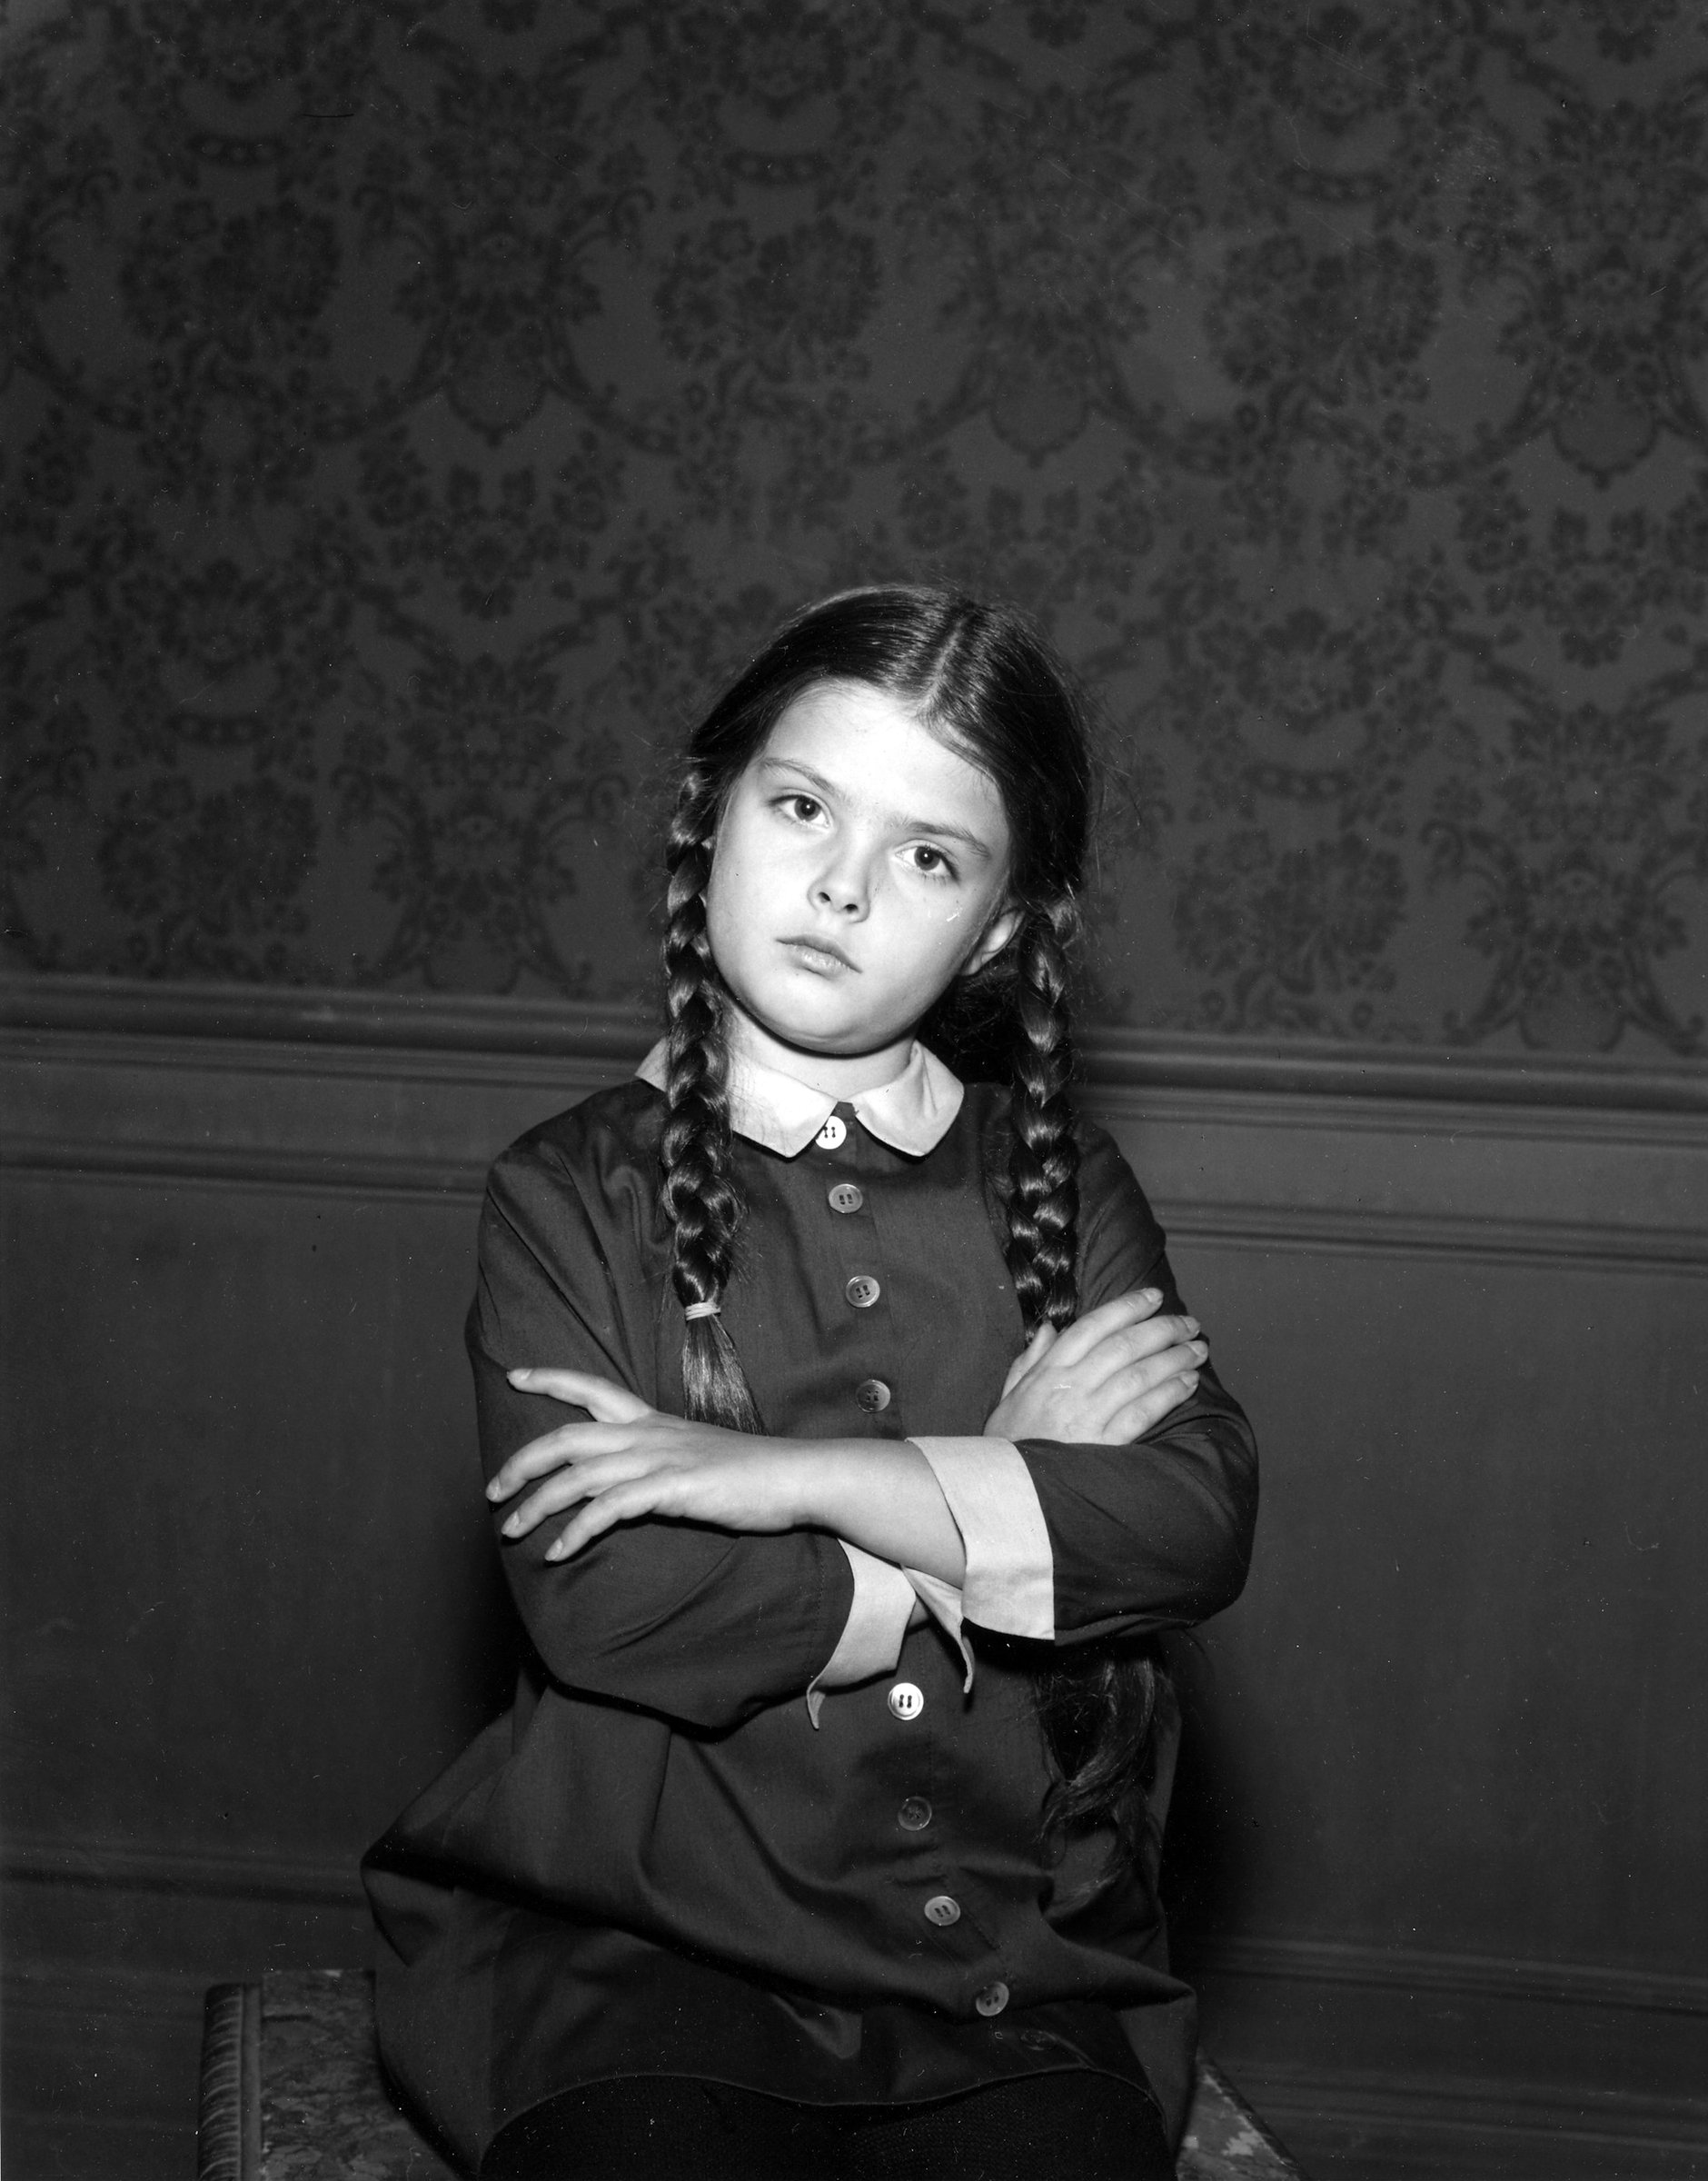 Lisa Loring as Wednesday Addams in 'The Addams Family' standing with her arms crossed